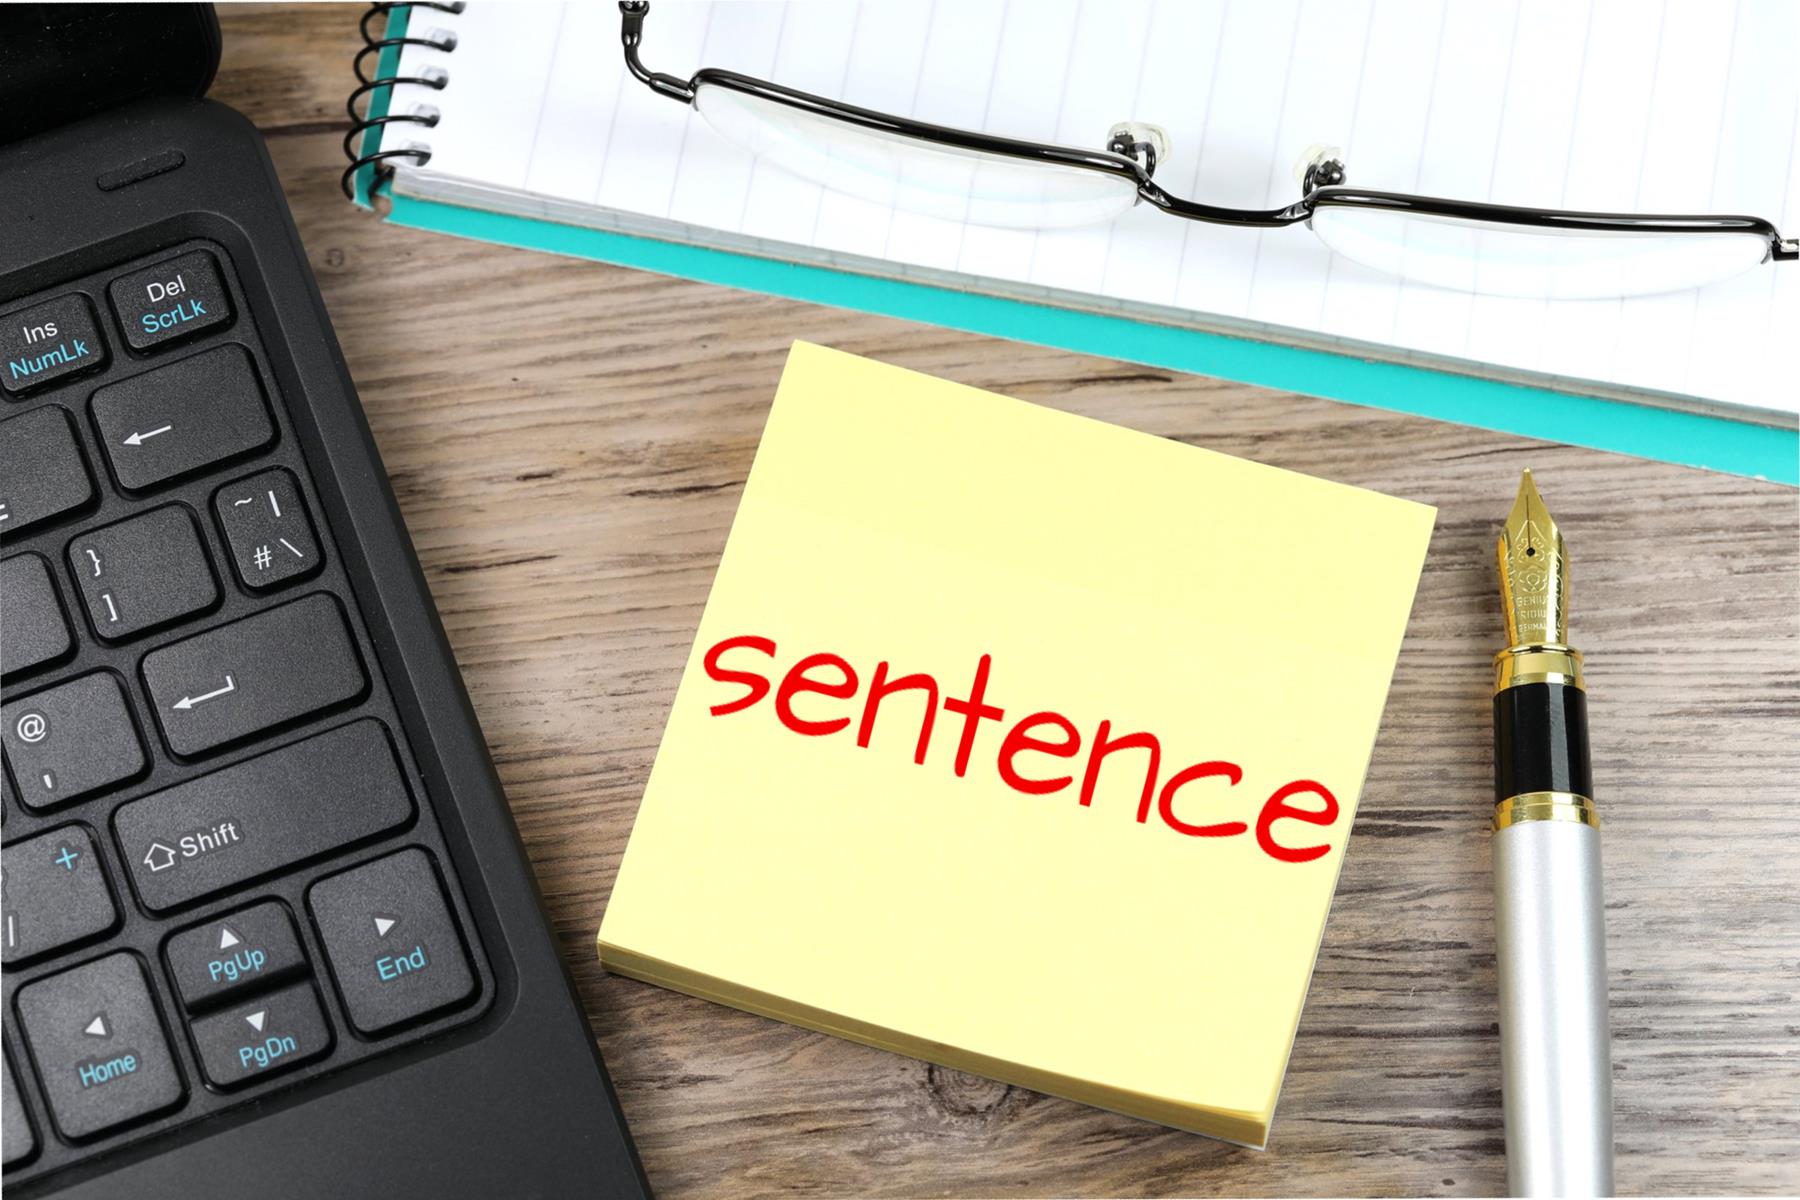 sentence-free-of-charge-creative-commons-post-it-note-image